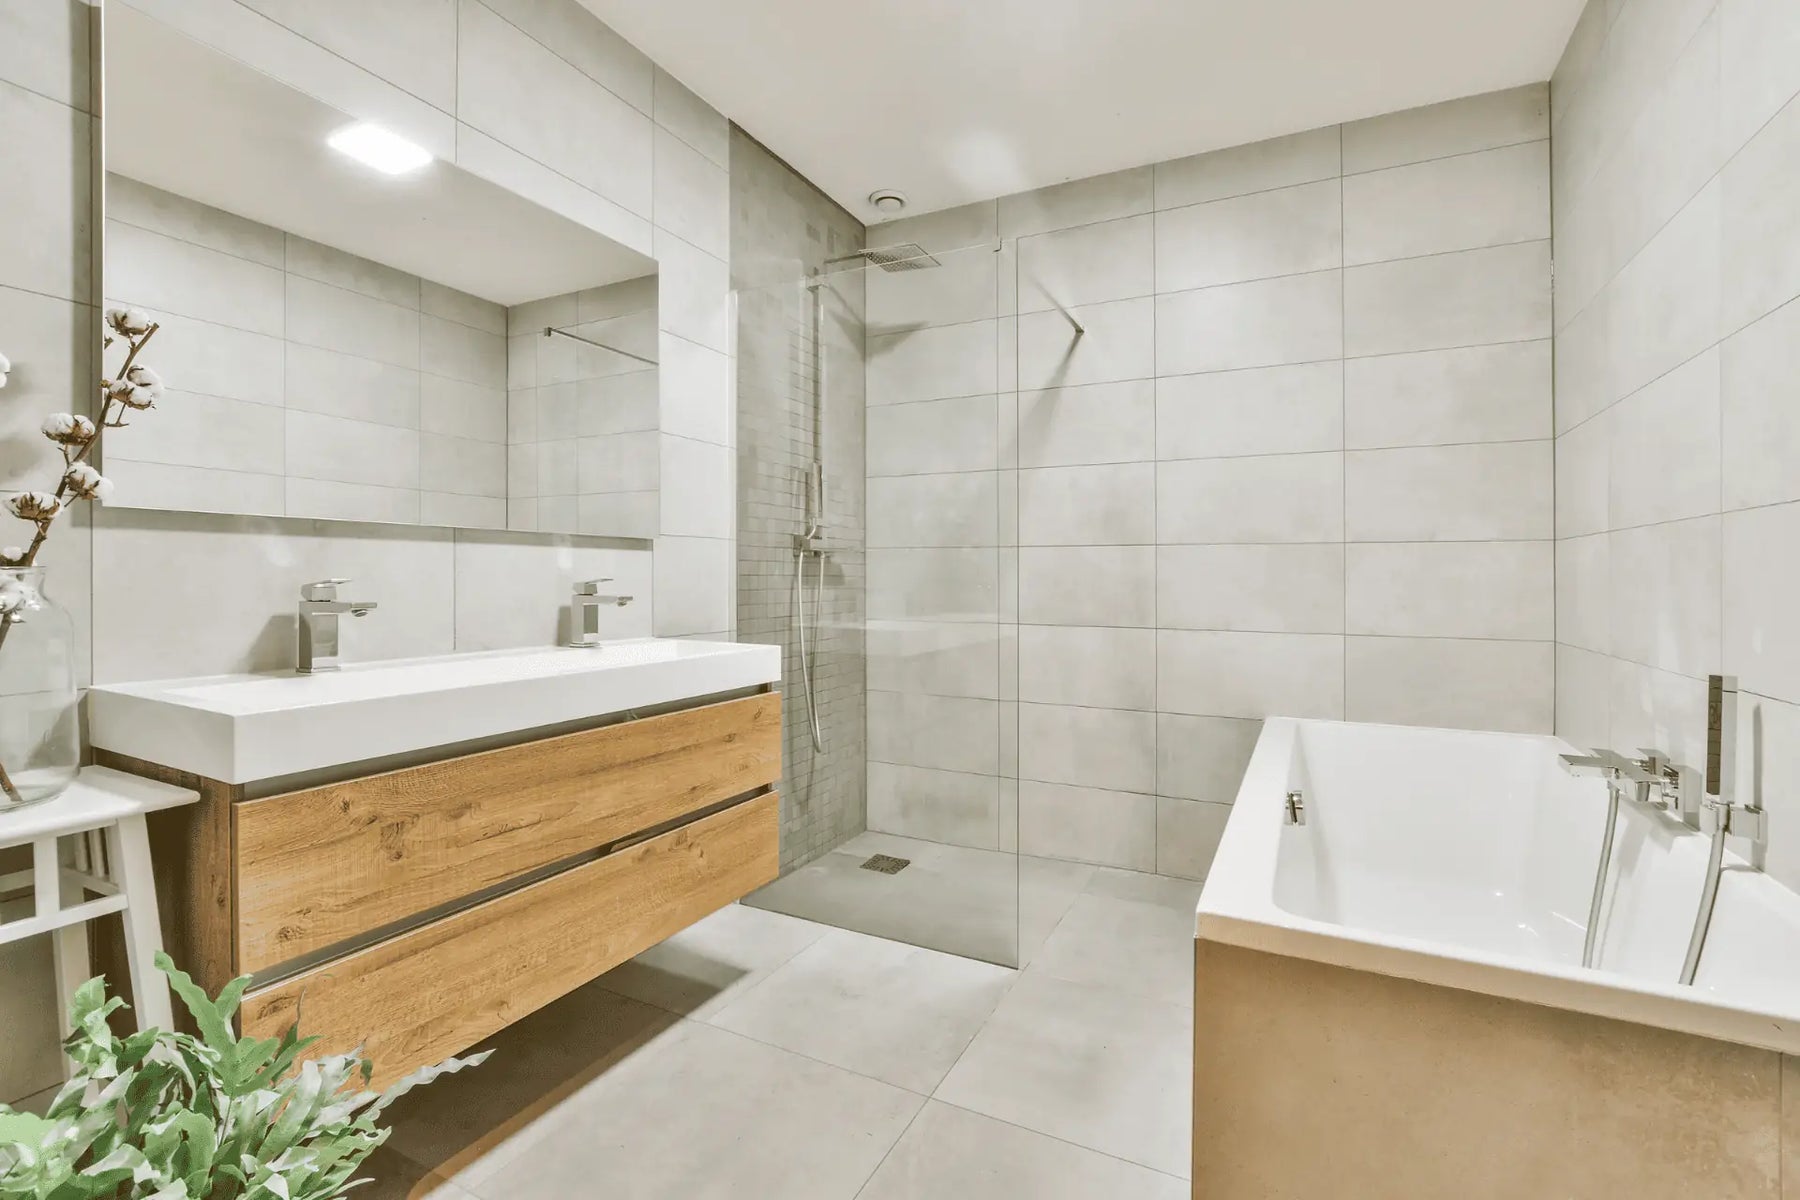  A renovated basement bathroom with modern fixtures